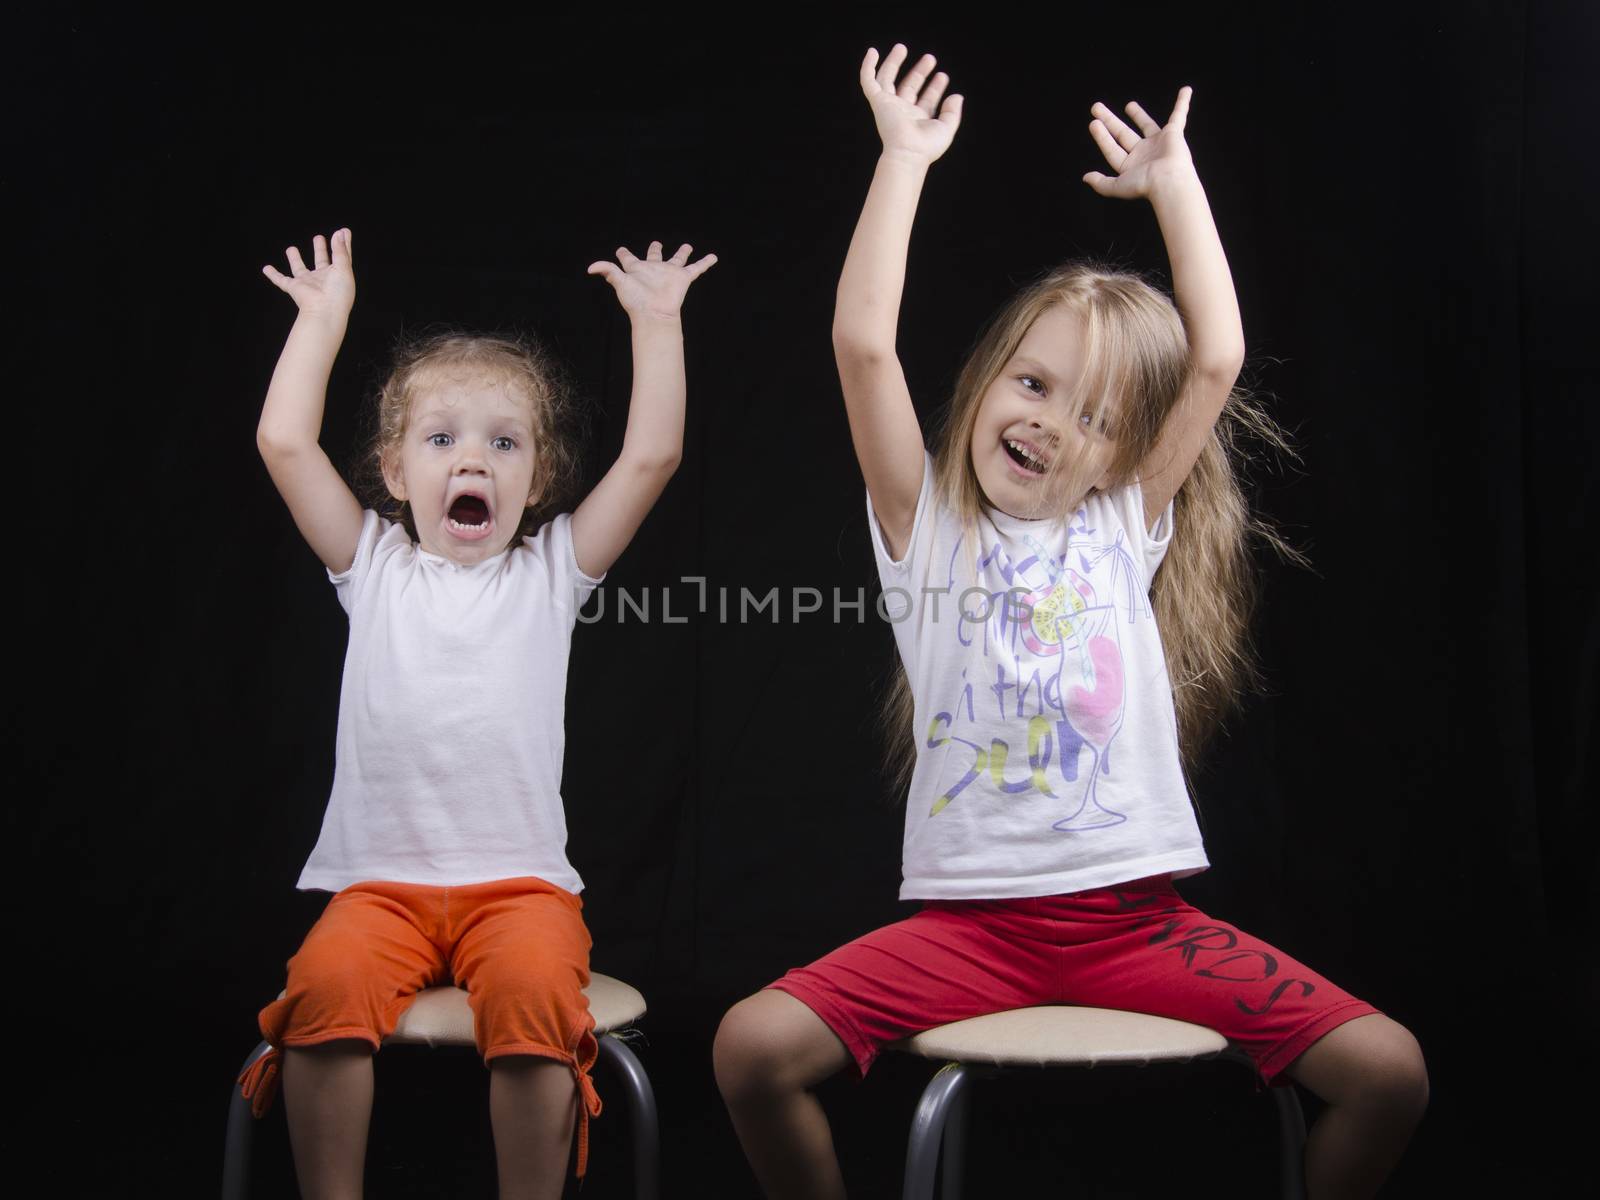 Portrait of the sisters - two little girls on the chairs. Girls fun smiling and looking in the frame. The girls raised their hands up.